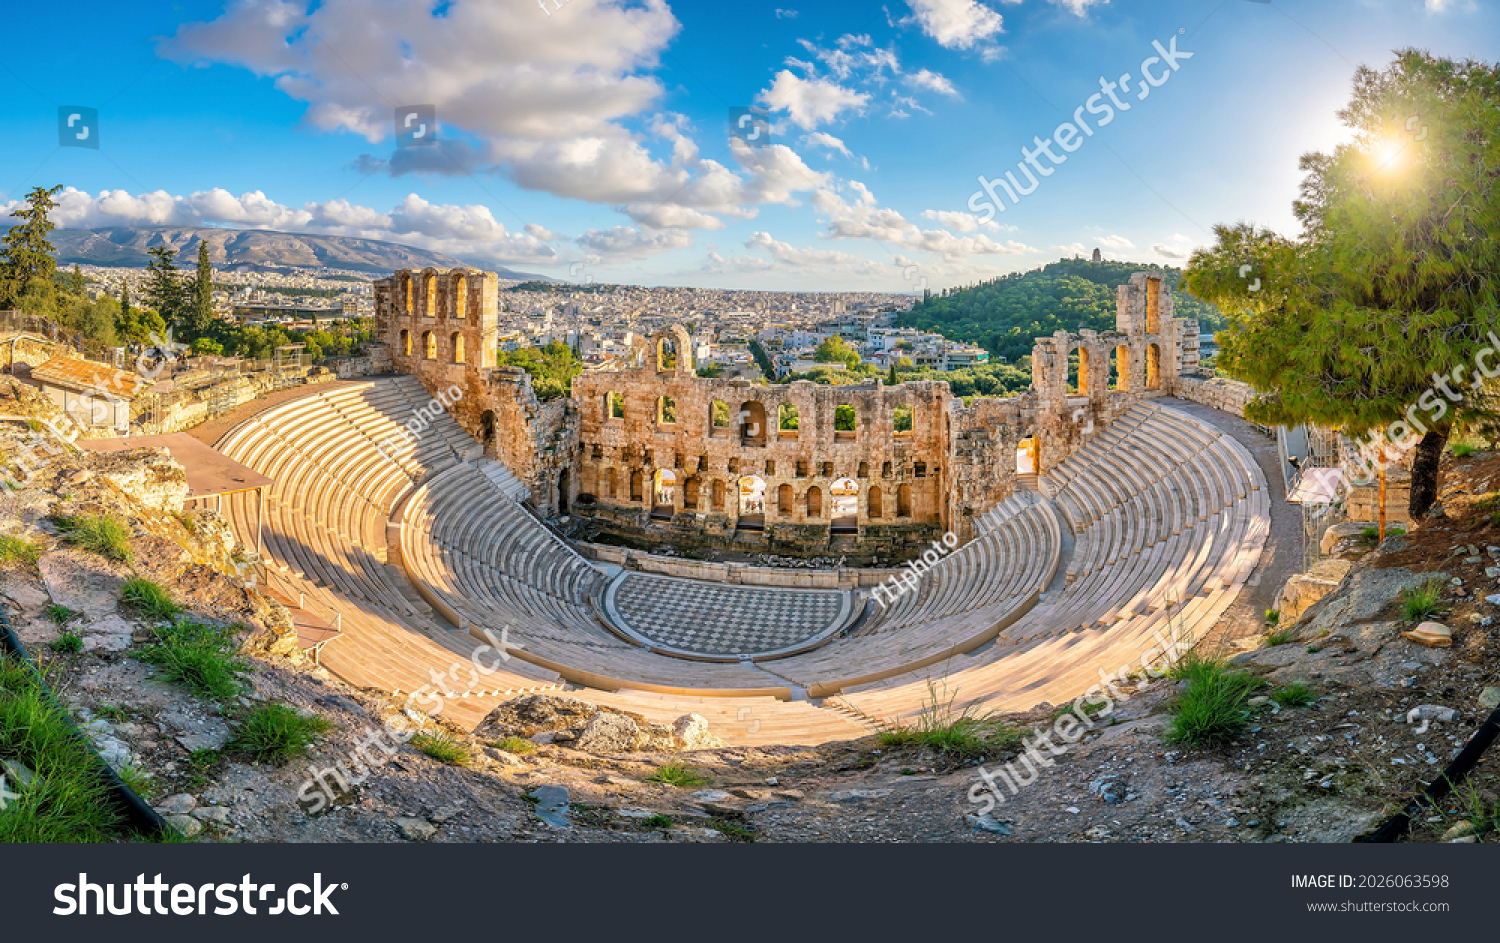 The Odeon of Herodes Atticus Roman theater structure at the Acropolis of Athens, Greece. #2026063598